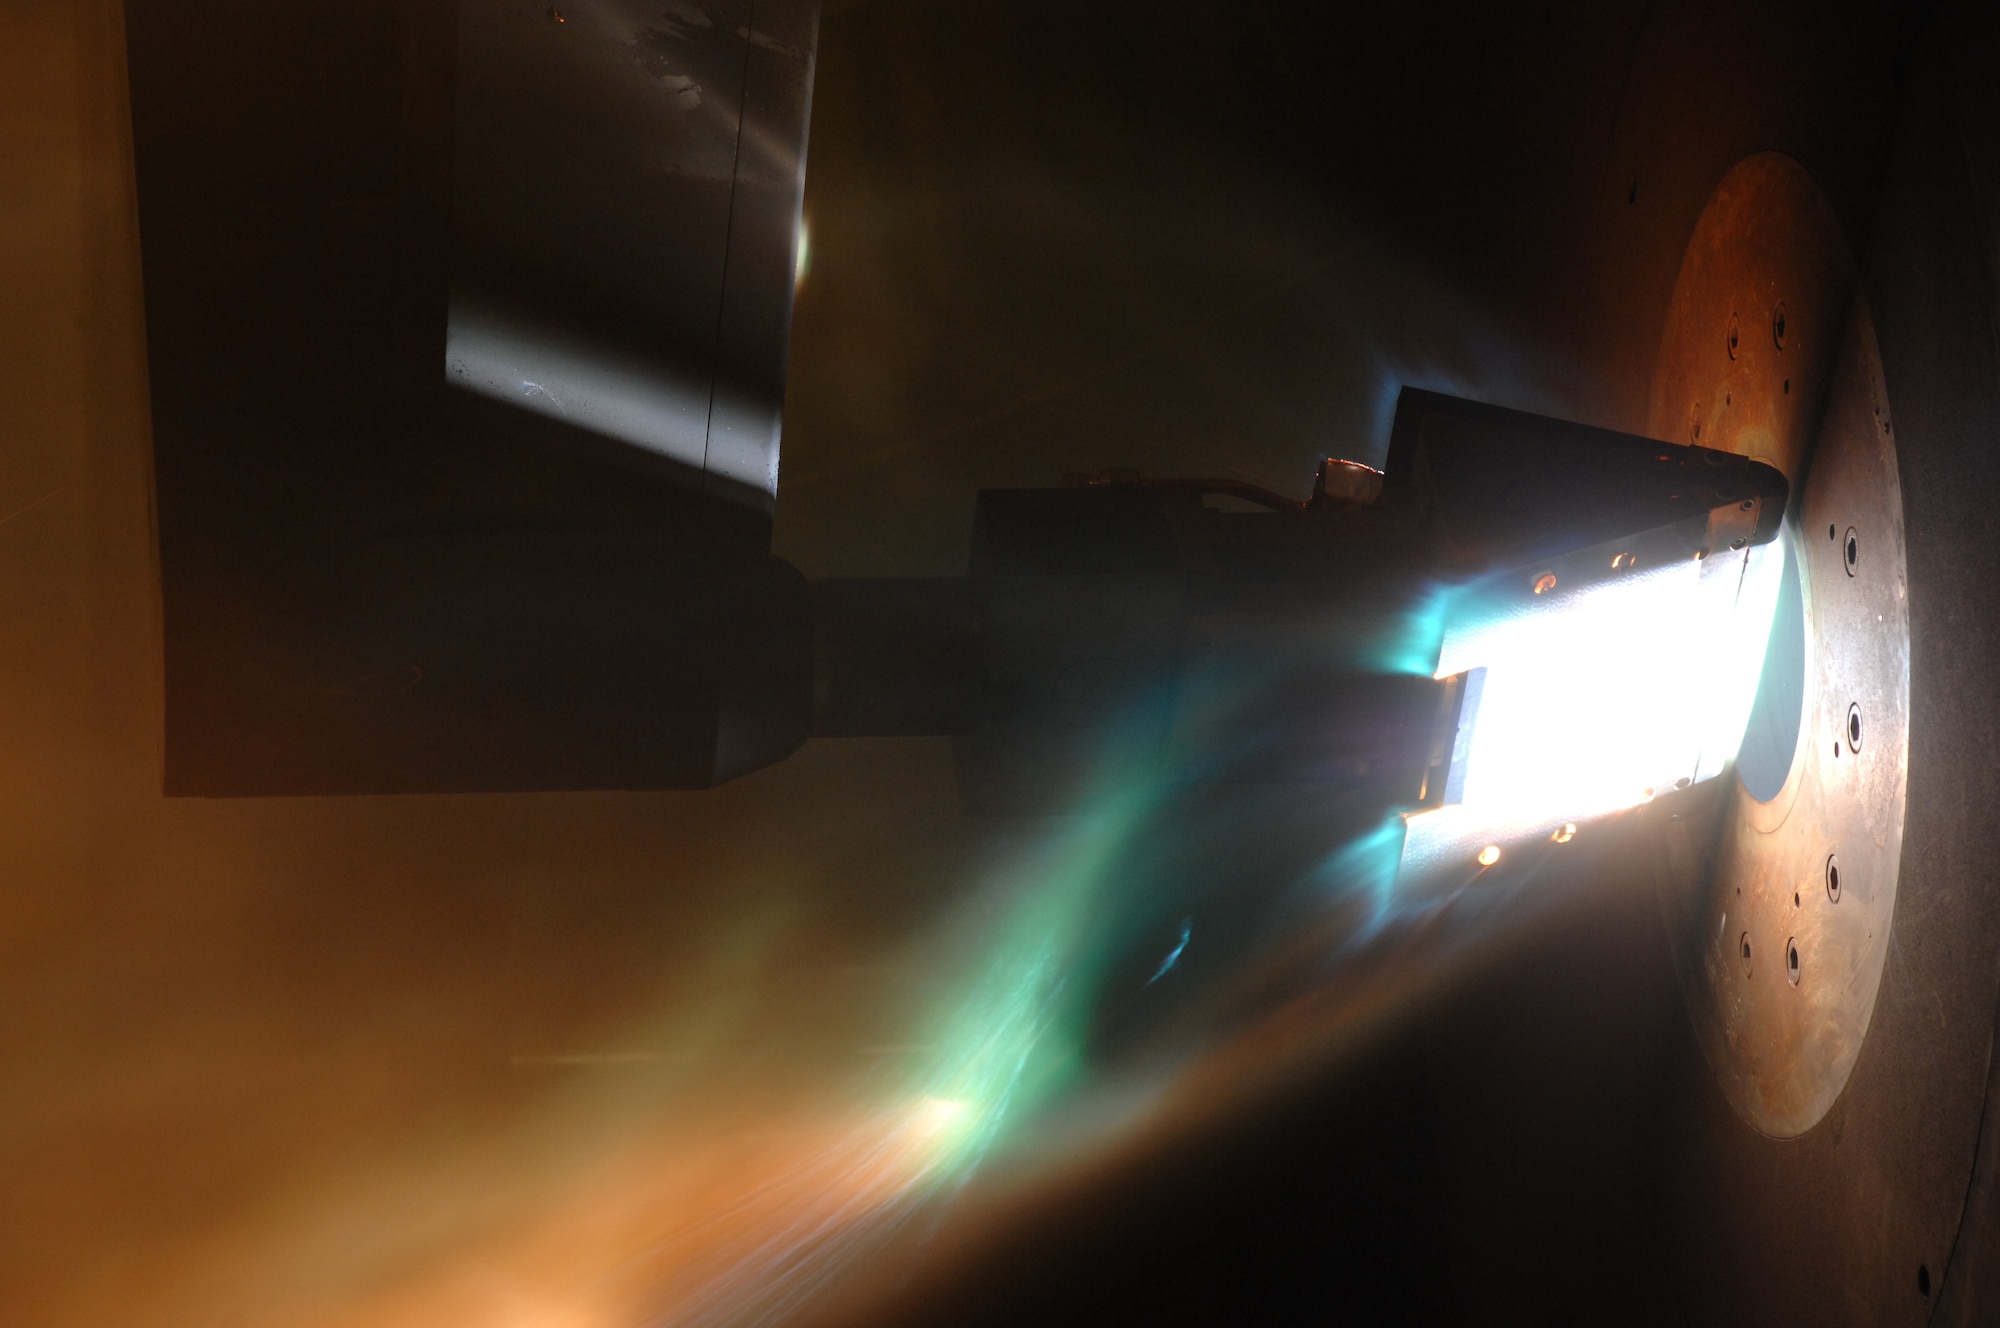 An Orion Crew Exploration Vehicle heat shield material sample undergoes preproduction aerothermal testing in the Arnold Engineering Development Complex H2 arc jet test facility at Arnold Air Force Base. (U.S. Air Force photo)